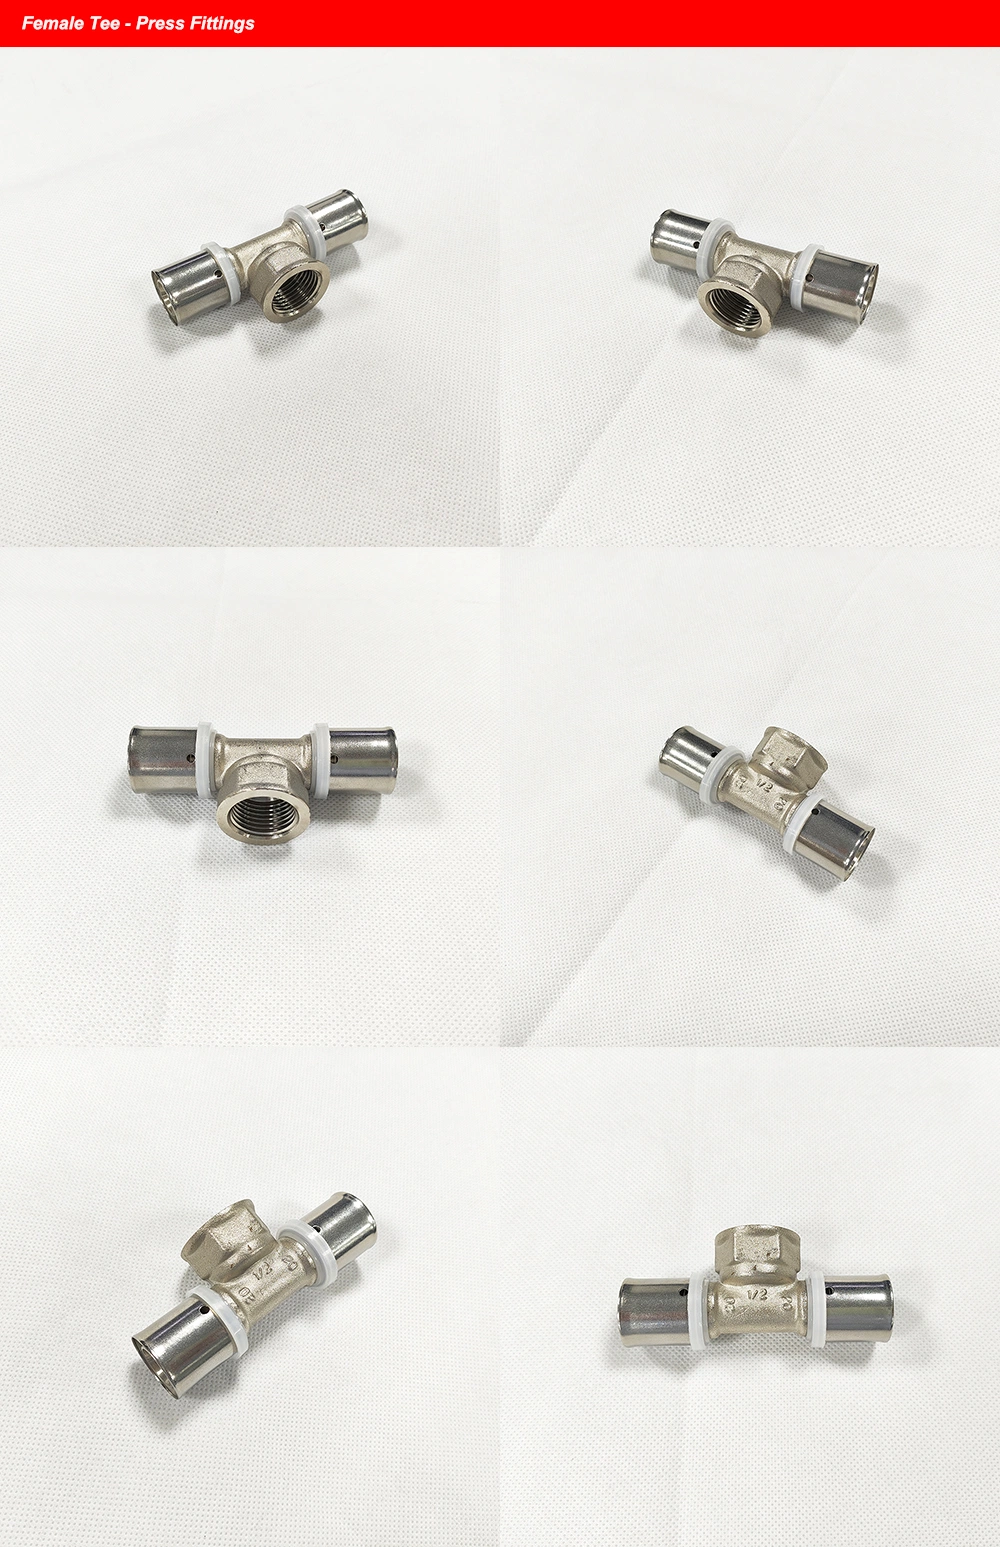 U, Th, M Type Female Tee Press Fittings for Multilayer Pipe and PE-X Pipe for Wholesale